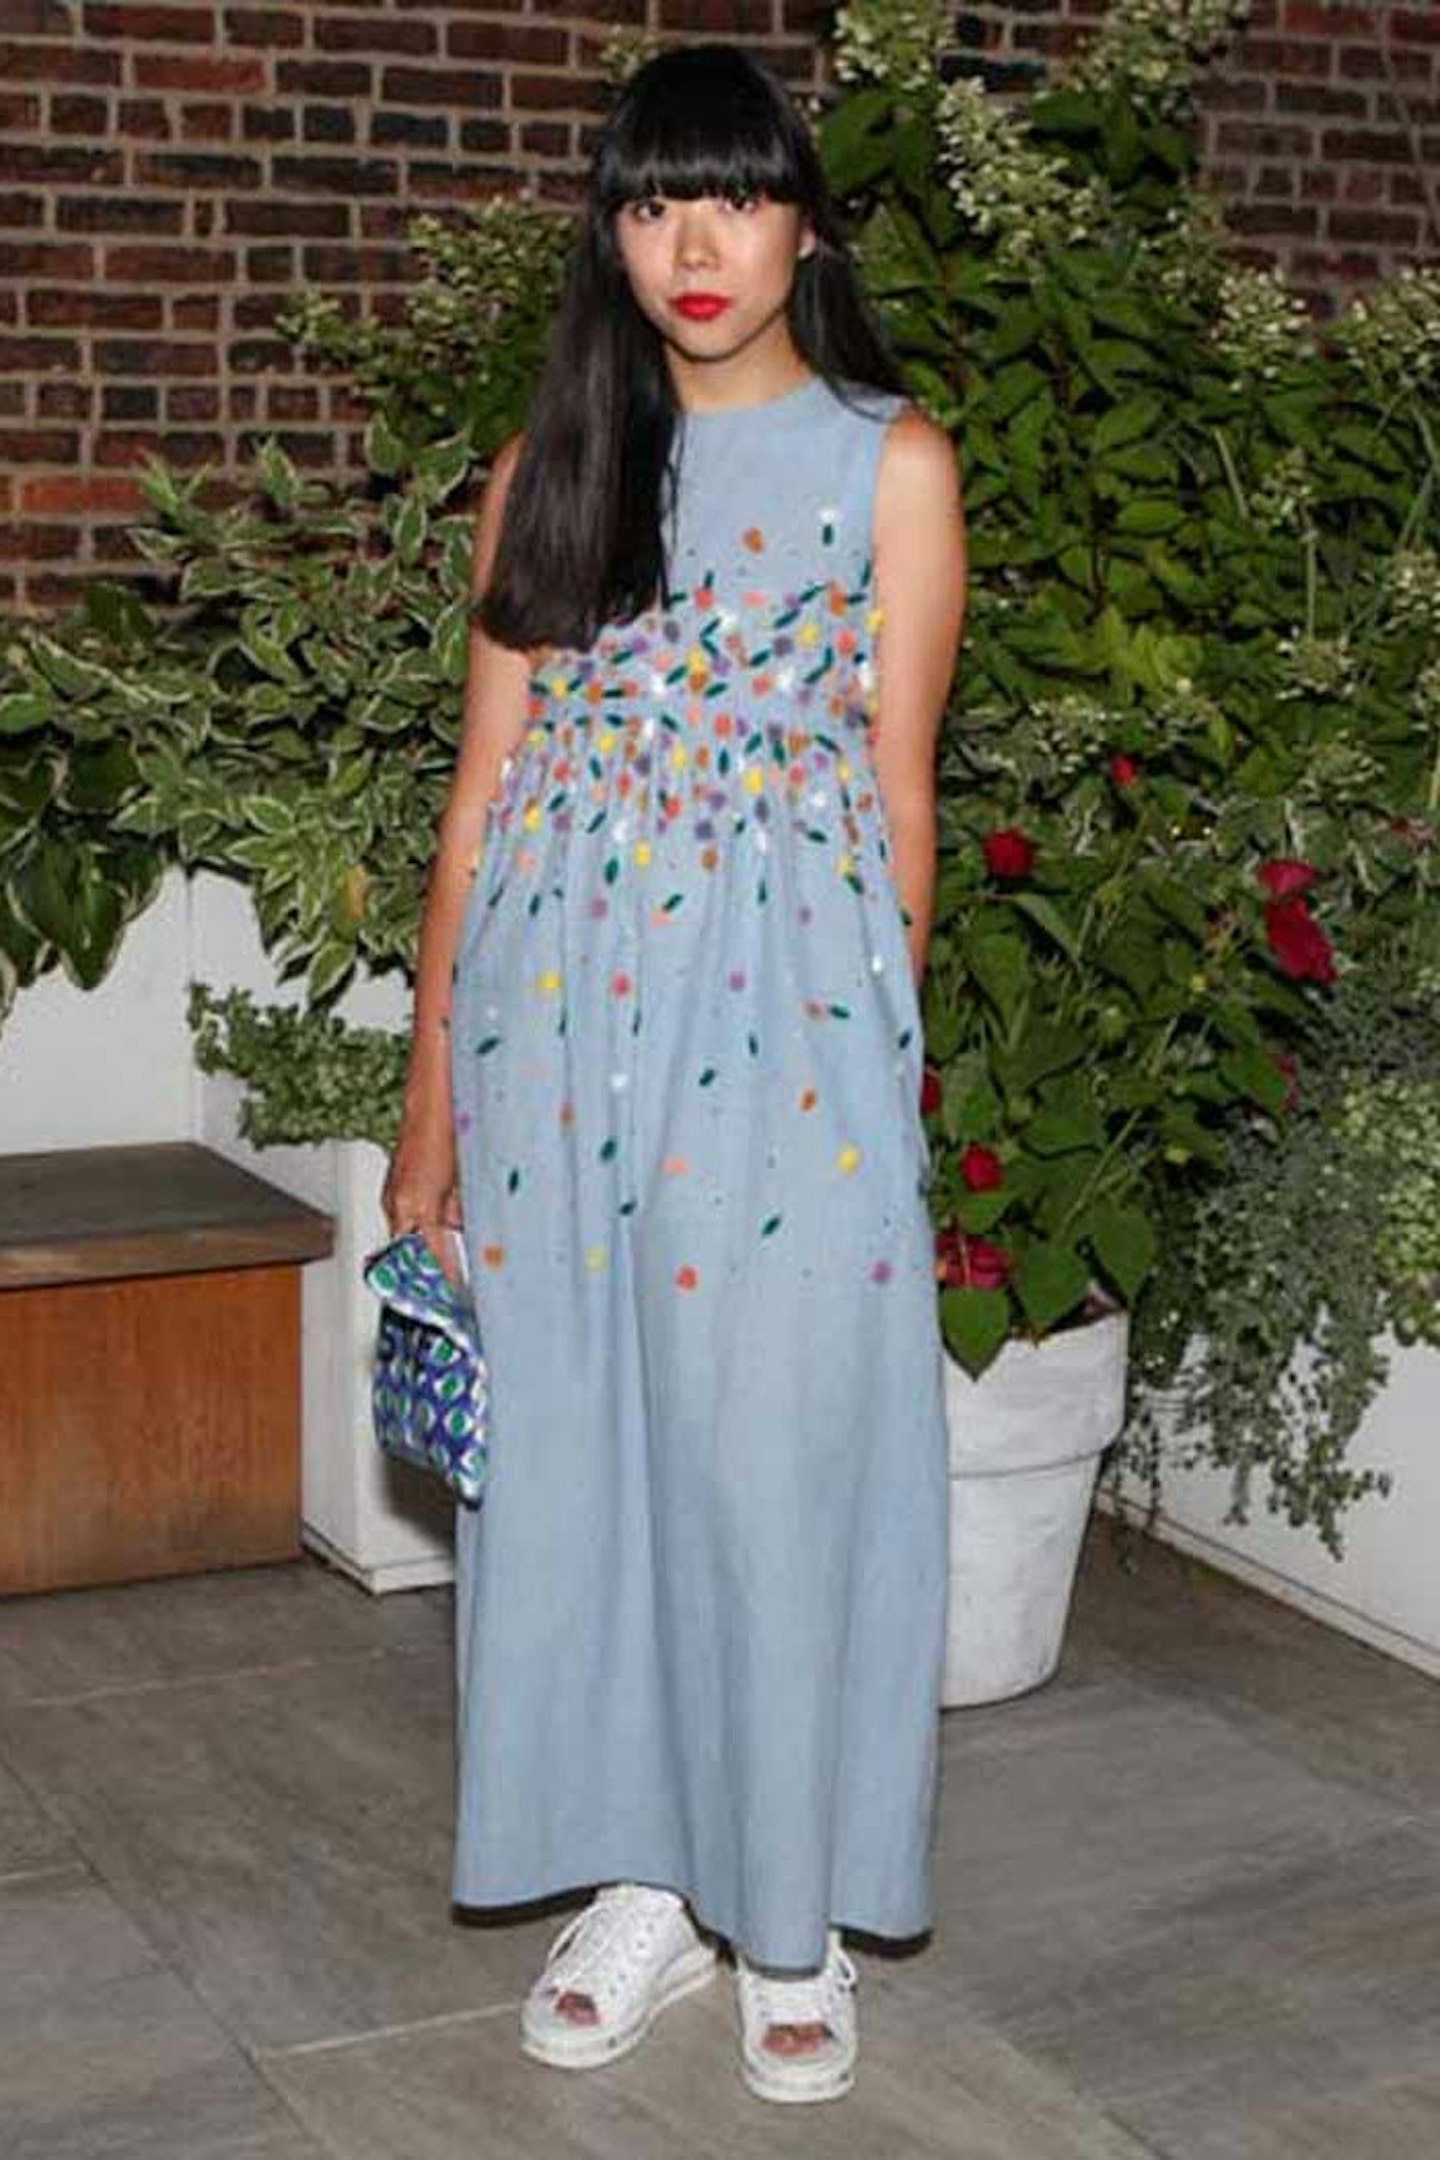 Susie Bubble at the Farfetch x Suno SS15 dinner